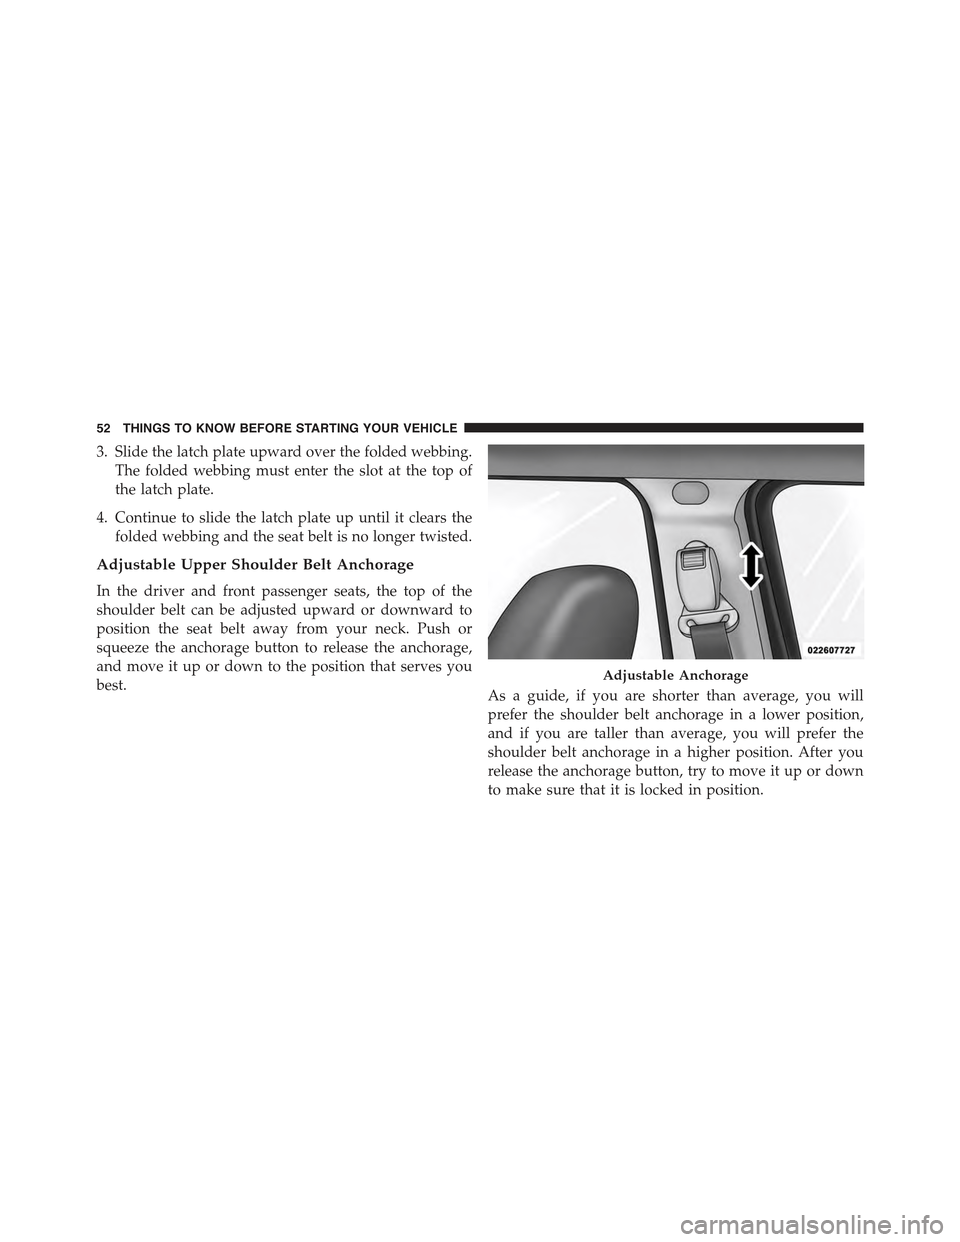 JEEP COMPASS 2015 1.G Workshop Manual 3. Slide the latch plate upward over the folded webbing.
The folded webbing must enter the slot at the top of
the latch plate.
4. Continue to slide the latch plate up until it clears the
folded webbin